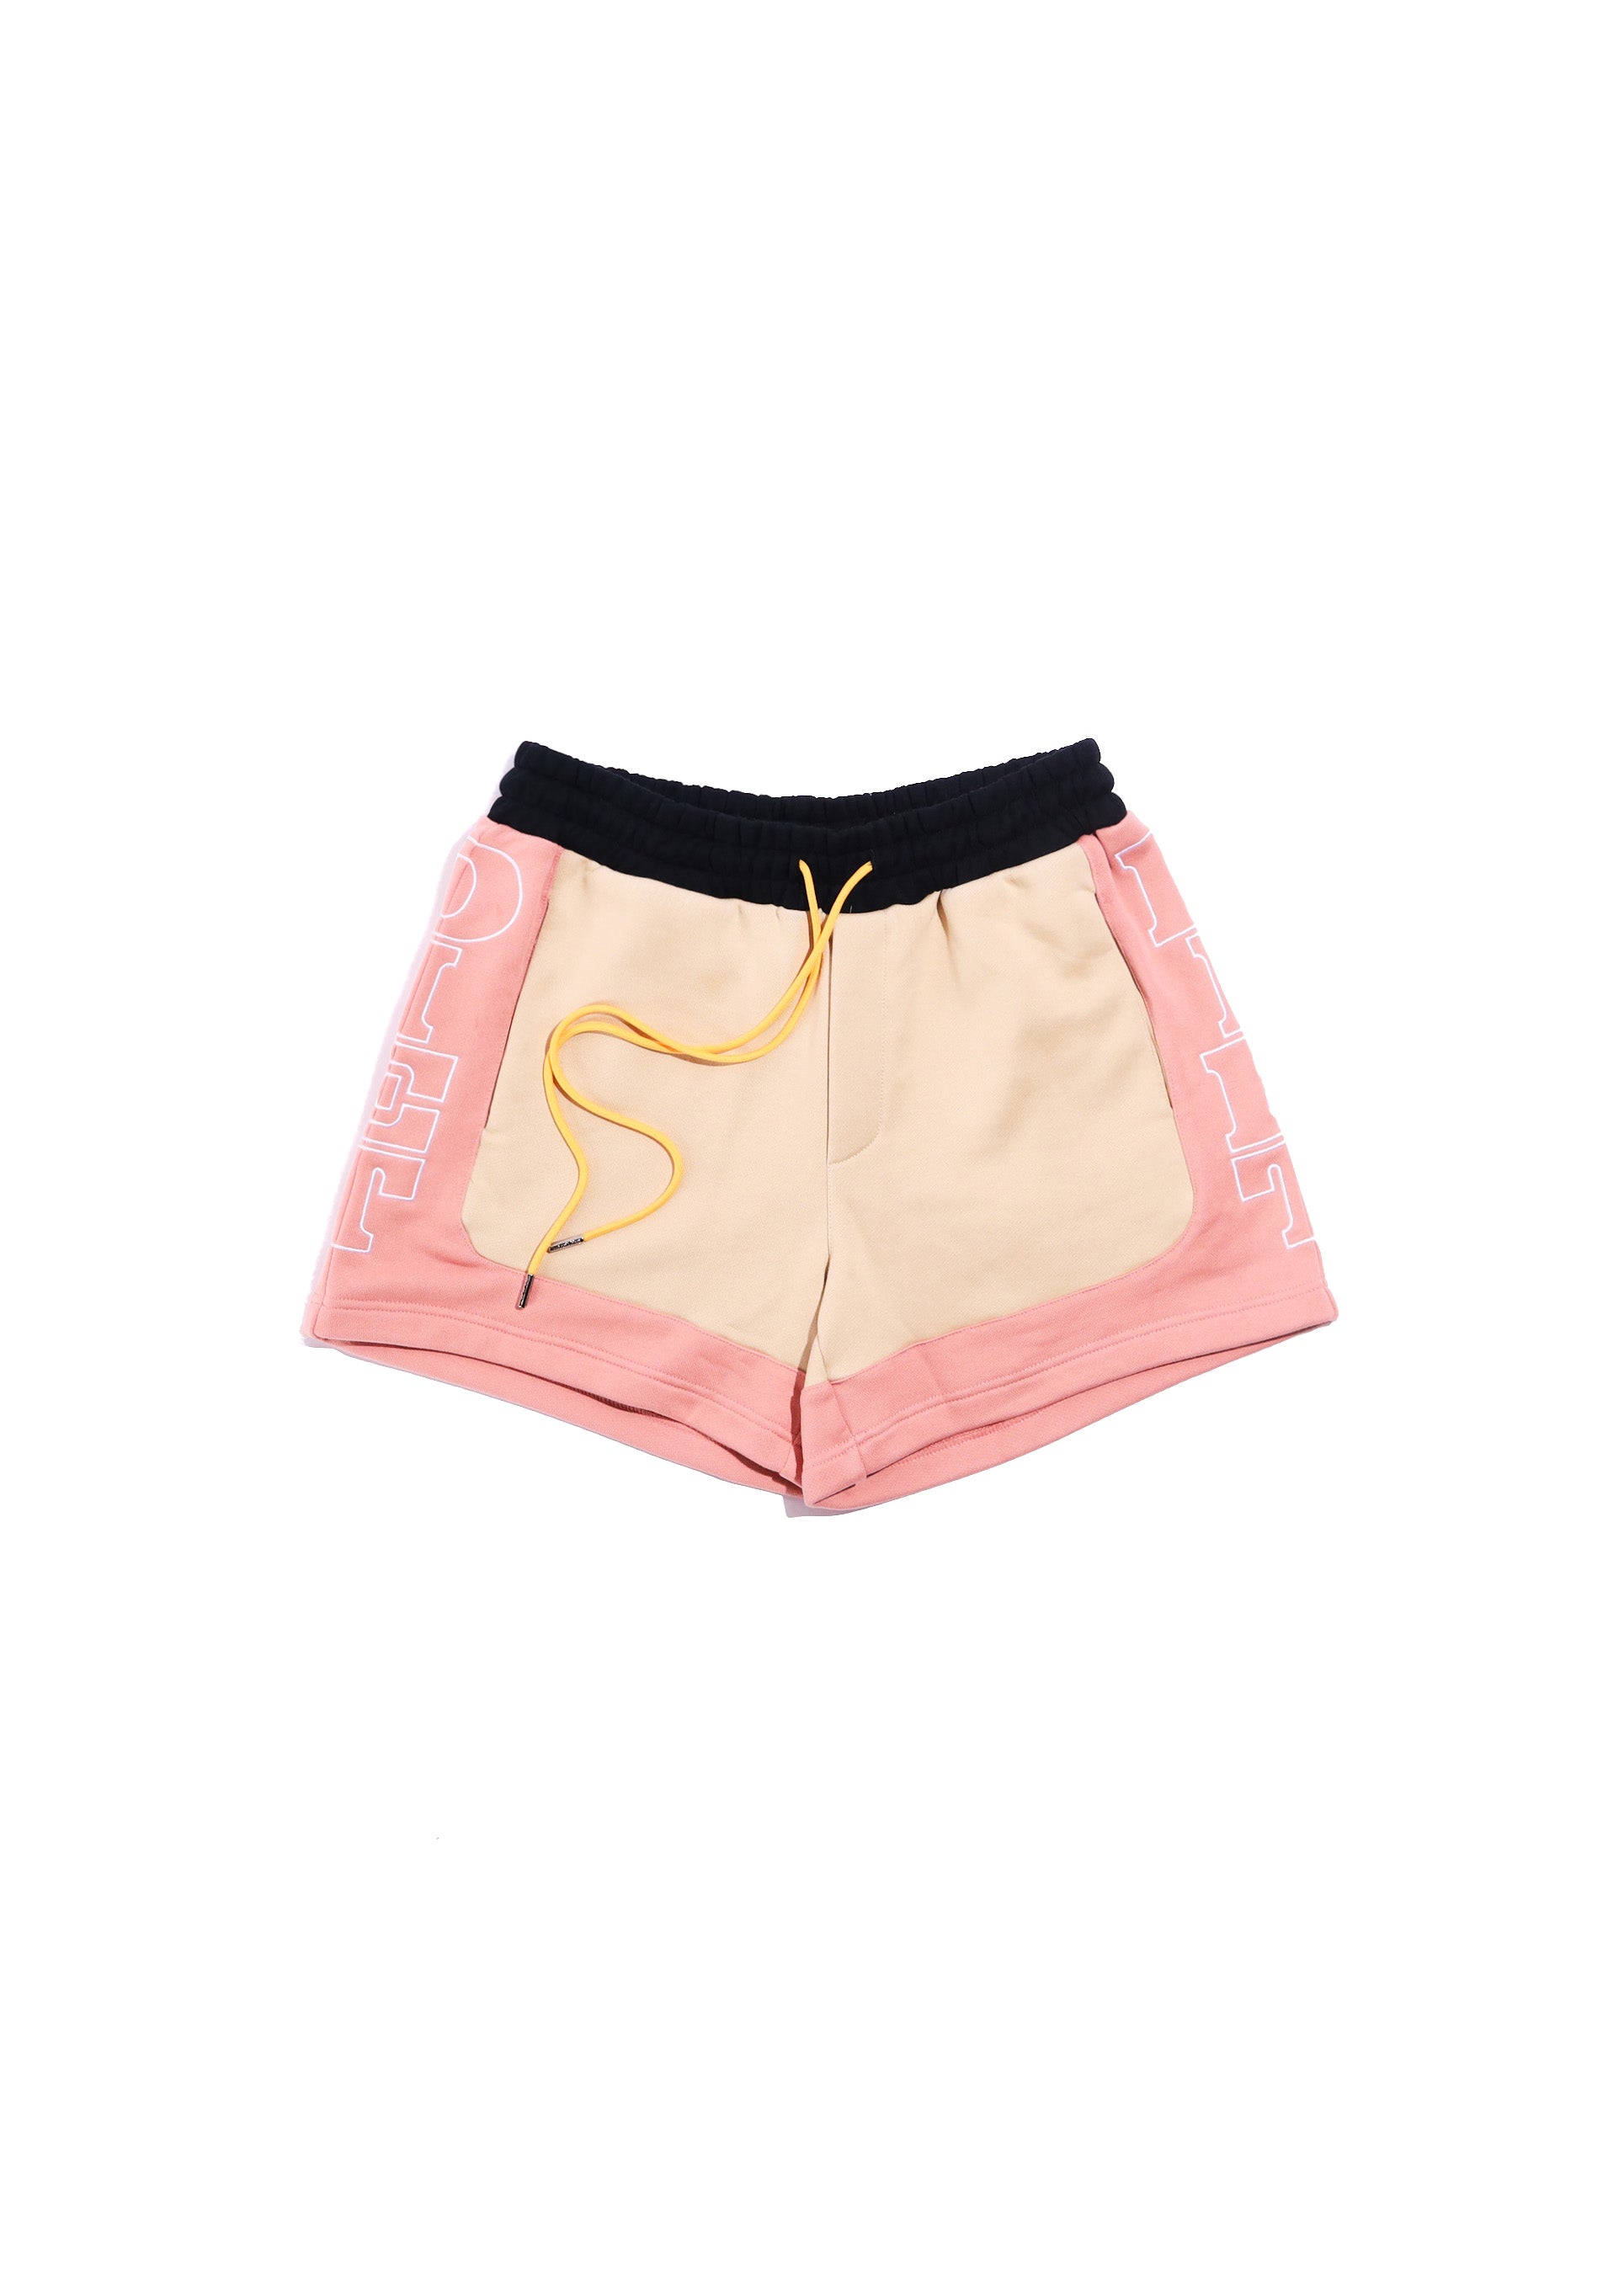 French Terry Row Shorts - Tan/Pink